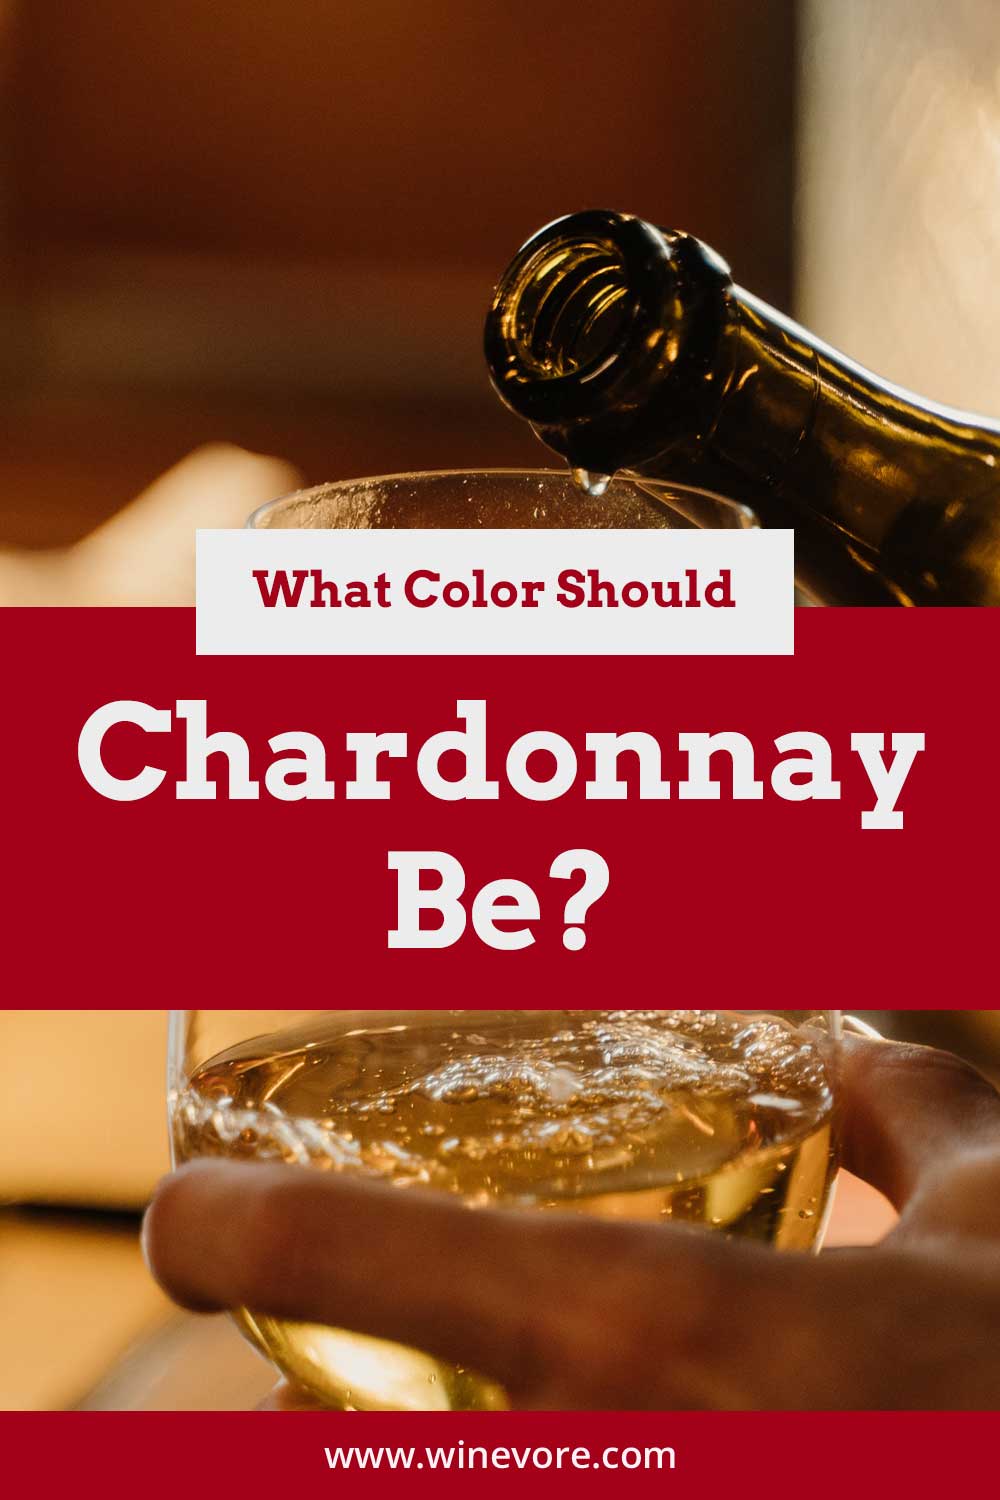 A glass of chardonnay in a hand - what color should it be?